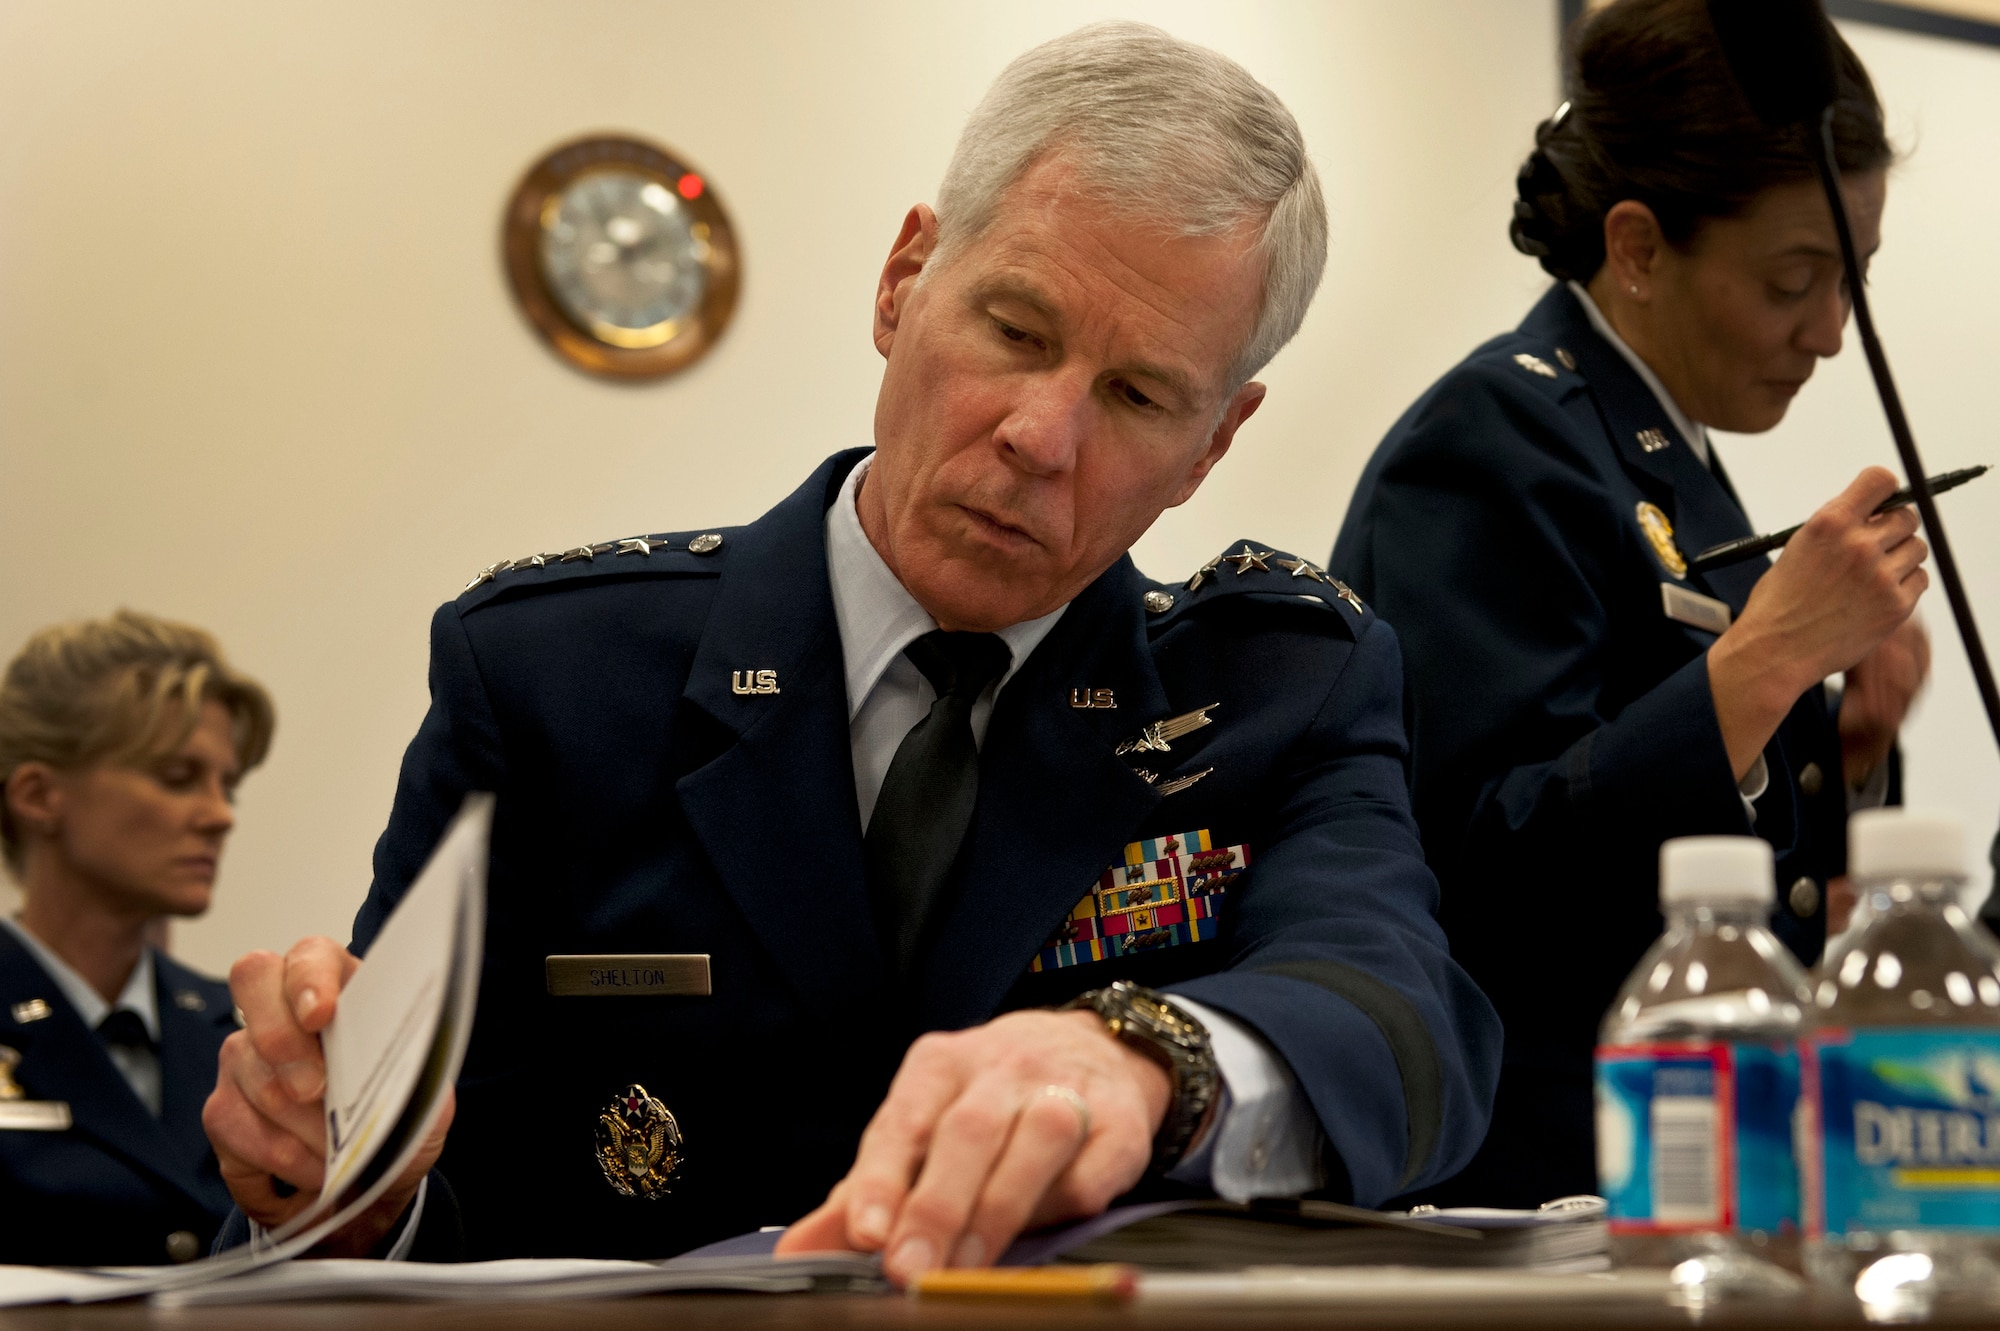 Gen. William Shelton reviews his notes before testifying April 3, 2014, in front of the House Armed Services Committee subcommittee on strategic forces, in Washington, D.C. Shelton is the Air Force Space Command commander, Peterson Air Force Base, Colo. (U.S. Air Force photo/Staff Sgt. Carlin Leslie)